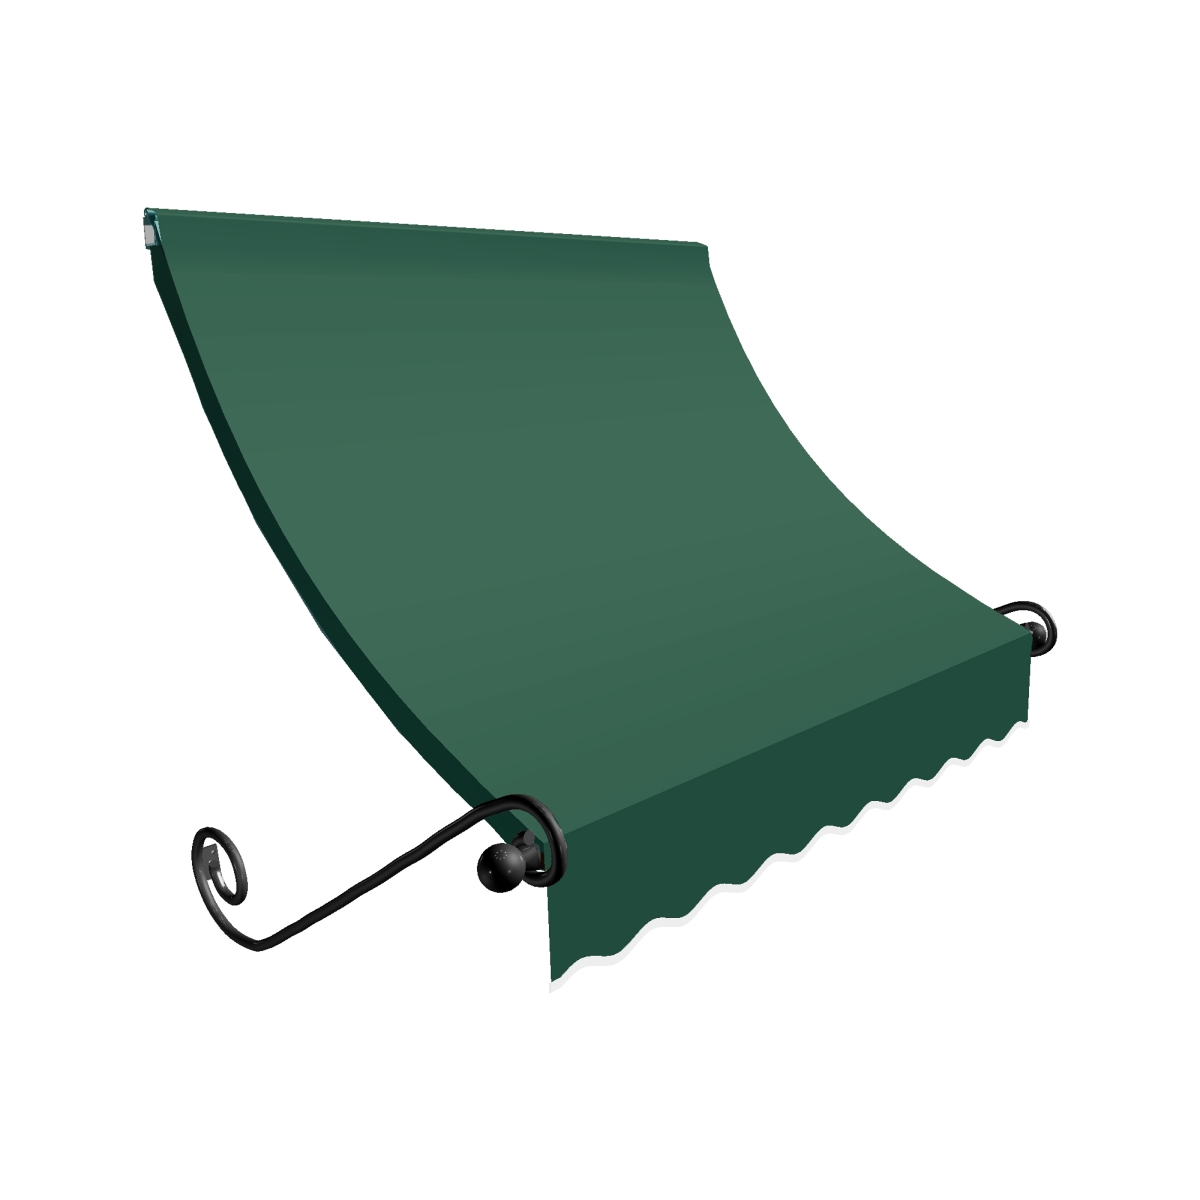 Ch22-us-7f 7.38 Ft. Charleston Window & Entry Awning, Forest Green - 31 X 24 In.